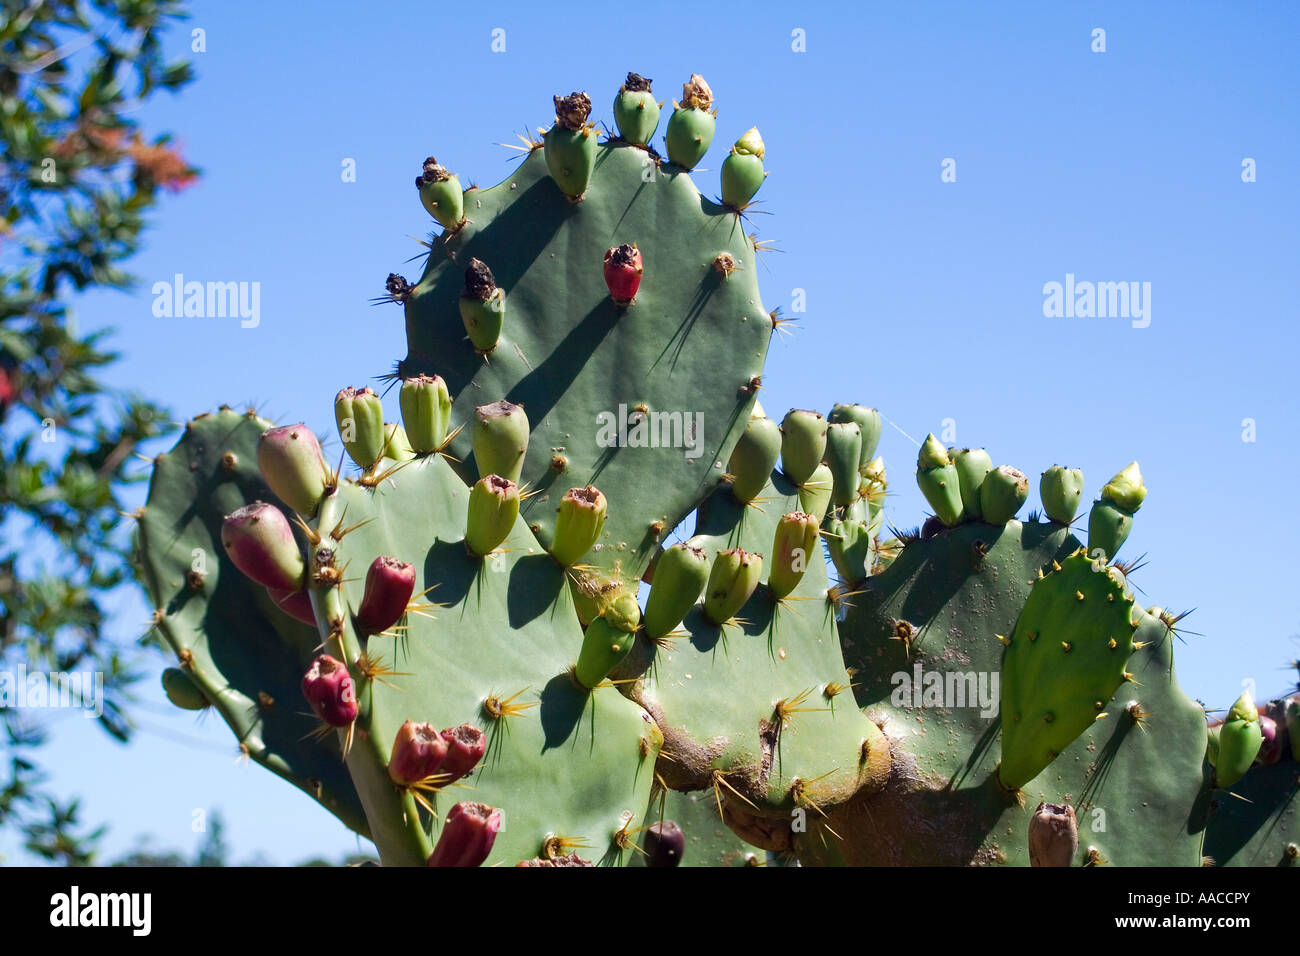 Prickly pear cacti Thorns Stock Photo